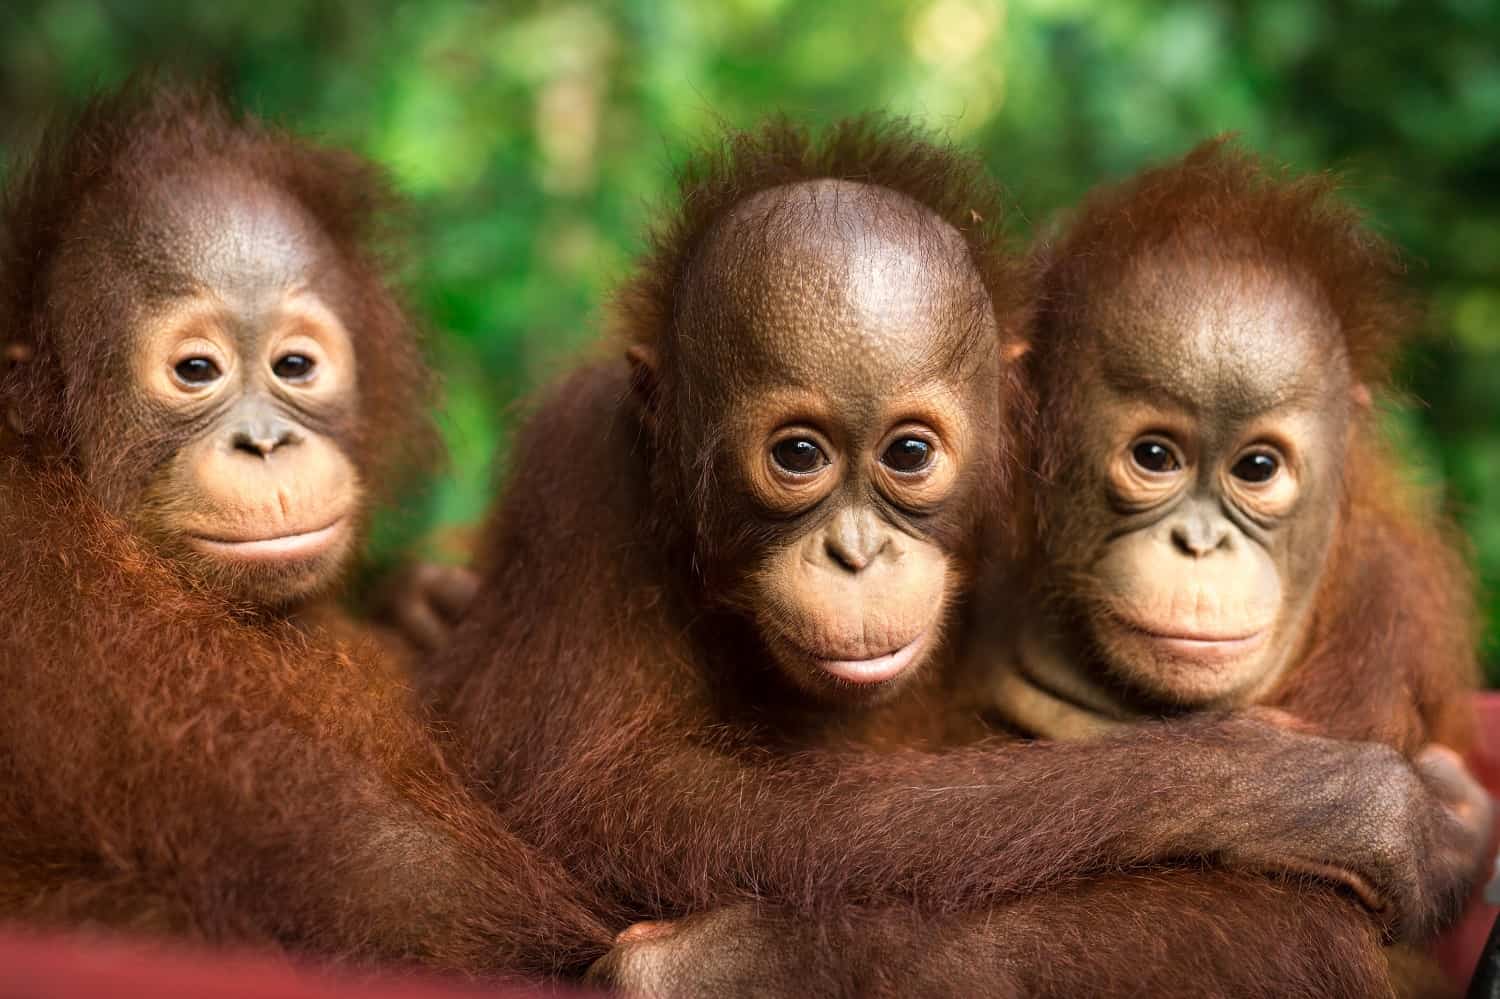 Headed back to the nursery after a long day in the baby forest. BOS Foundation, Central Kalimantan, Indonesia